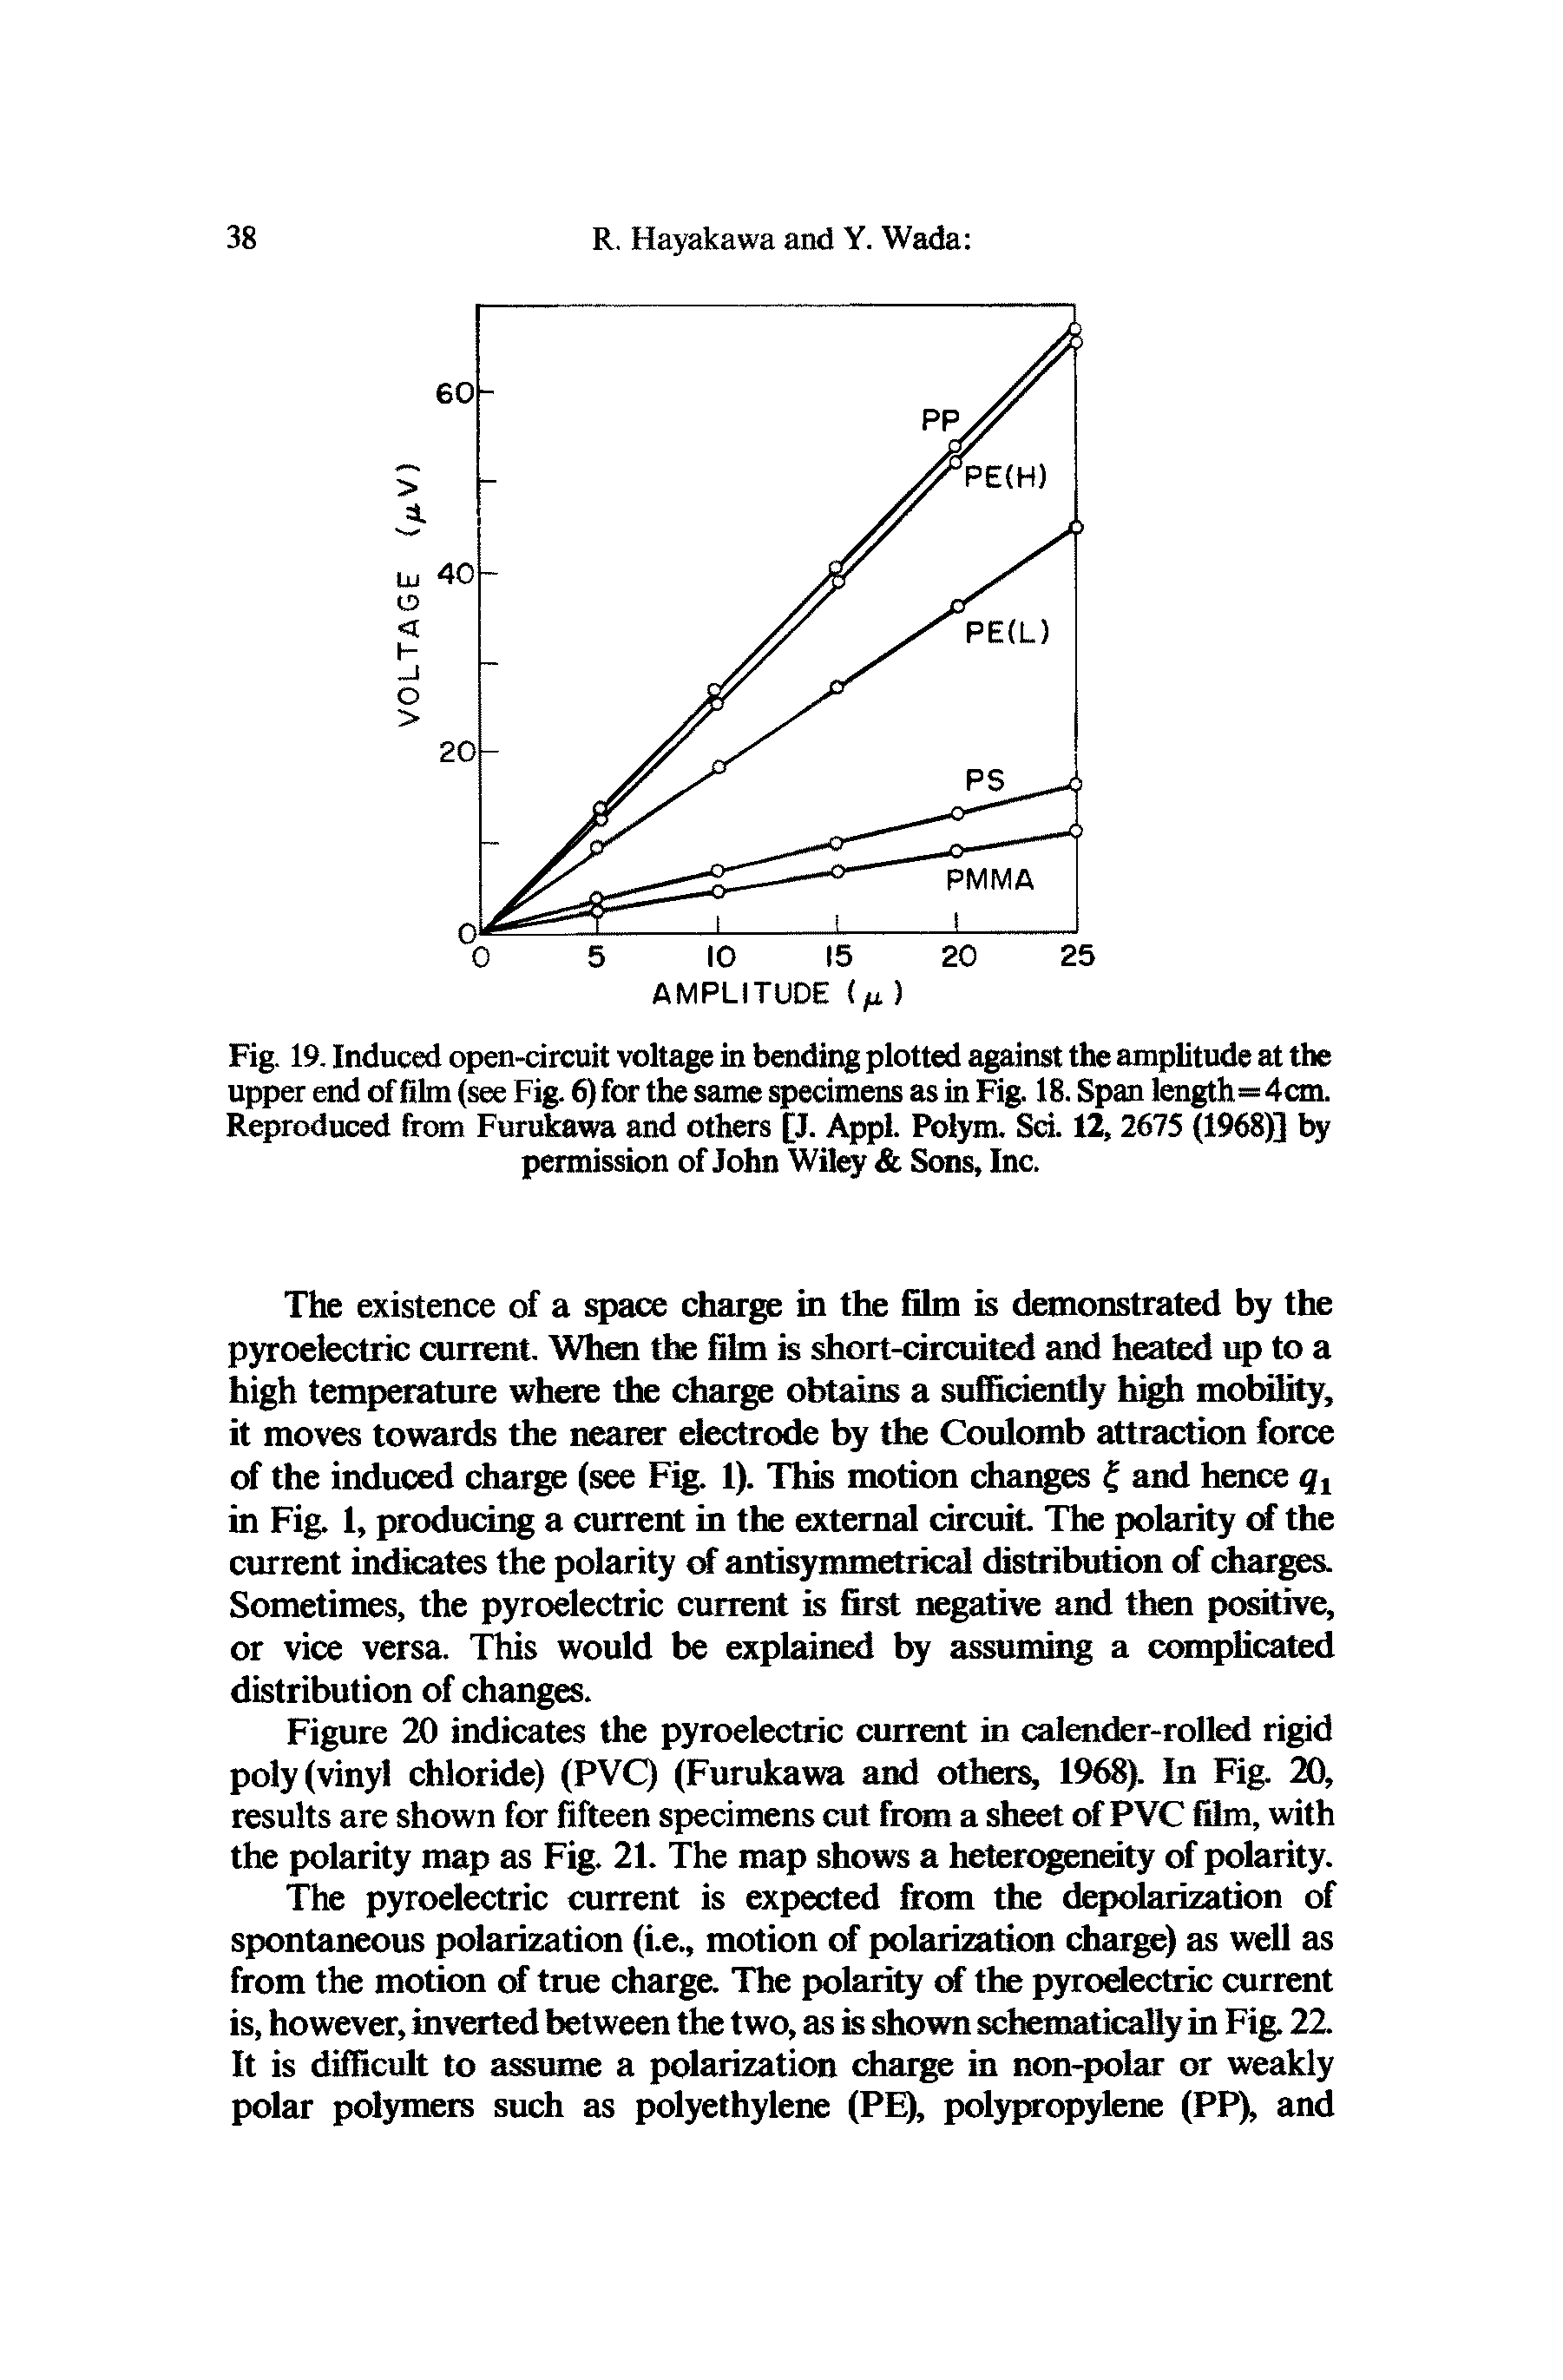 Figure 20 indicates the pyroelectric current in calender-rolled rigid poly (vinyl chloride) (PVQ (Furukawa and others, 1968). In Fig. 20, results are shown for fifteen specimens cut from a sheet of PVC film, with the polarity map as Fig. 21. The map shows a heterogeneity of polarity.